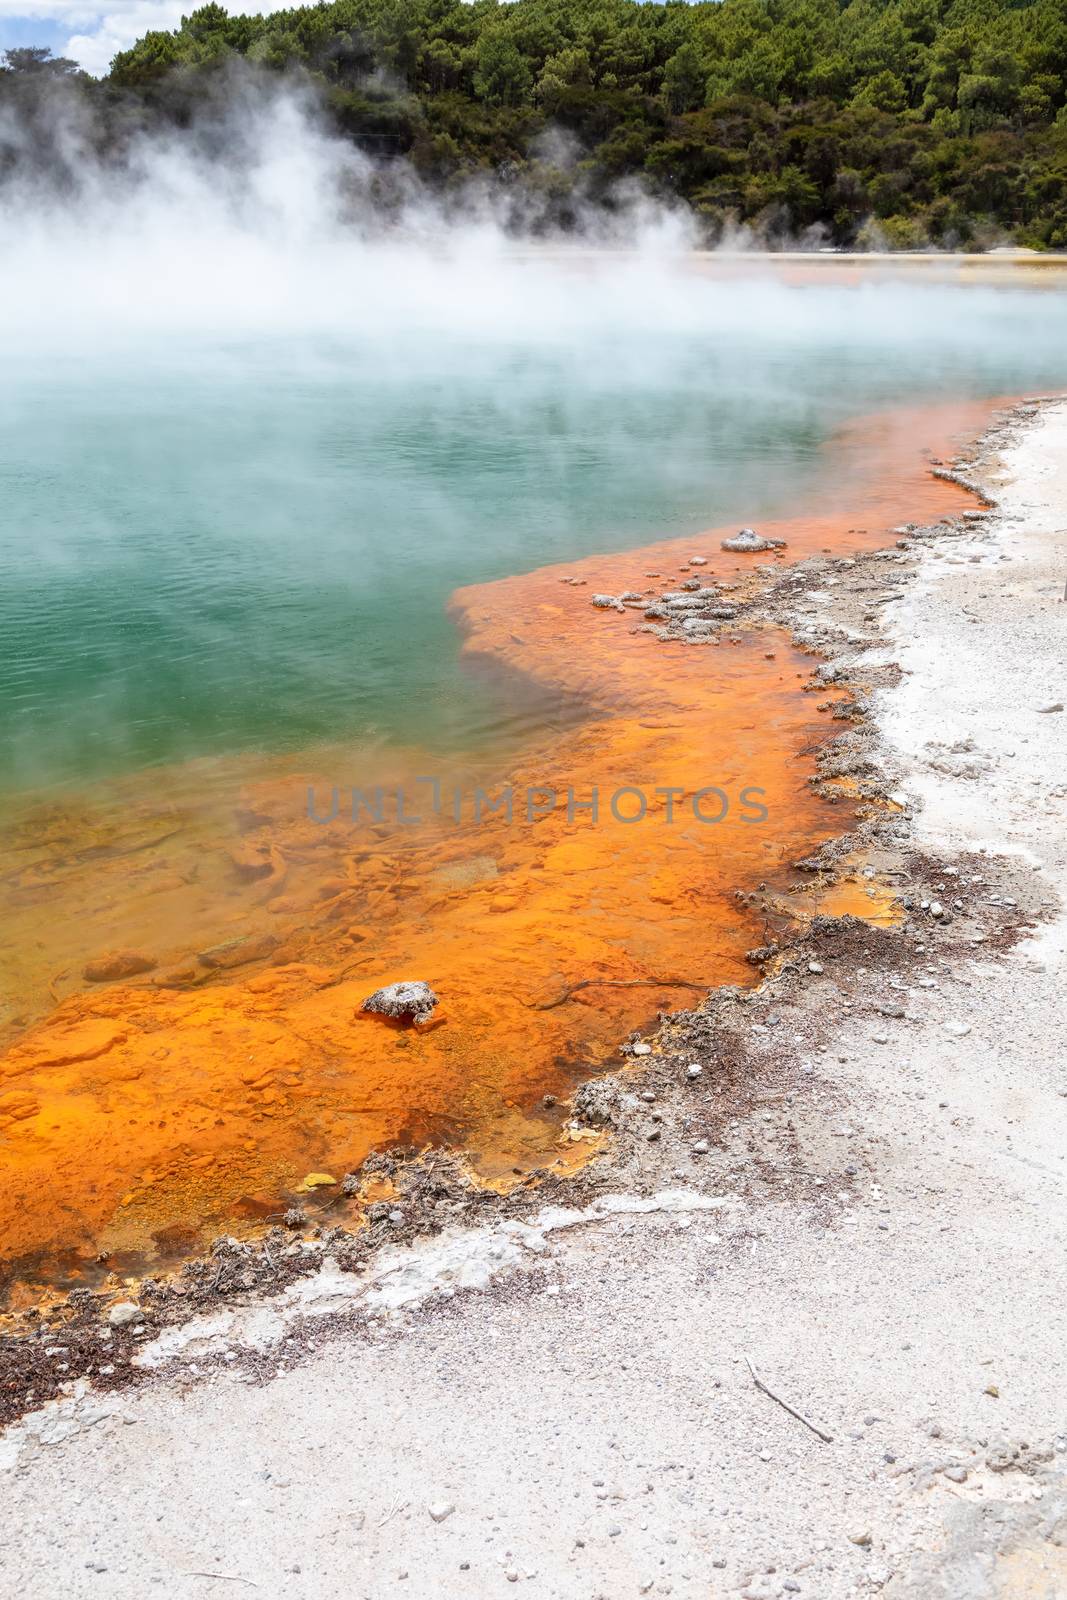 An image of the hot sparkling lake in New Zealand